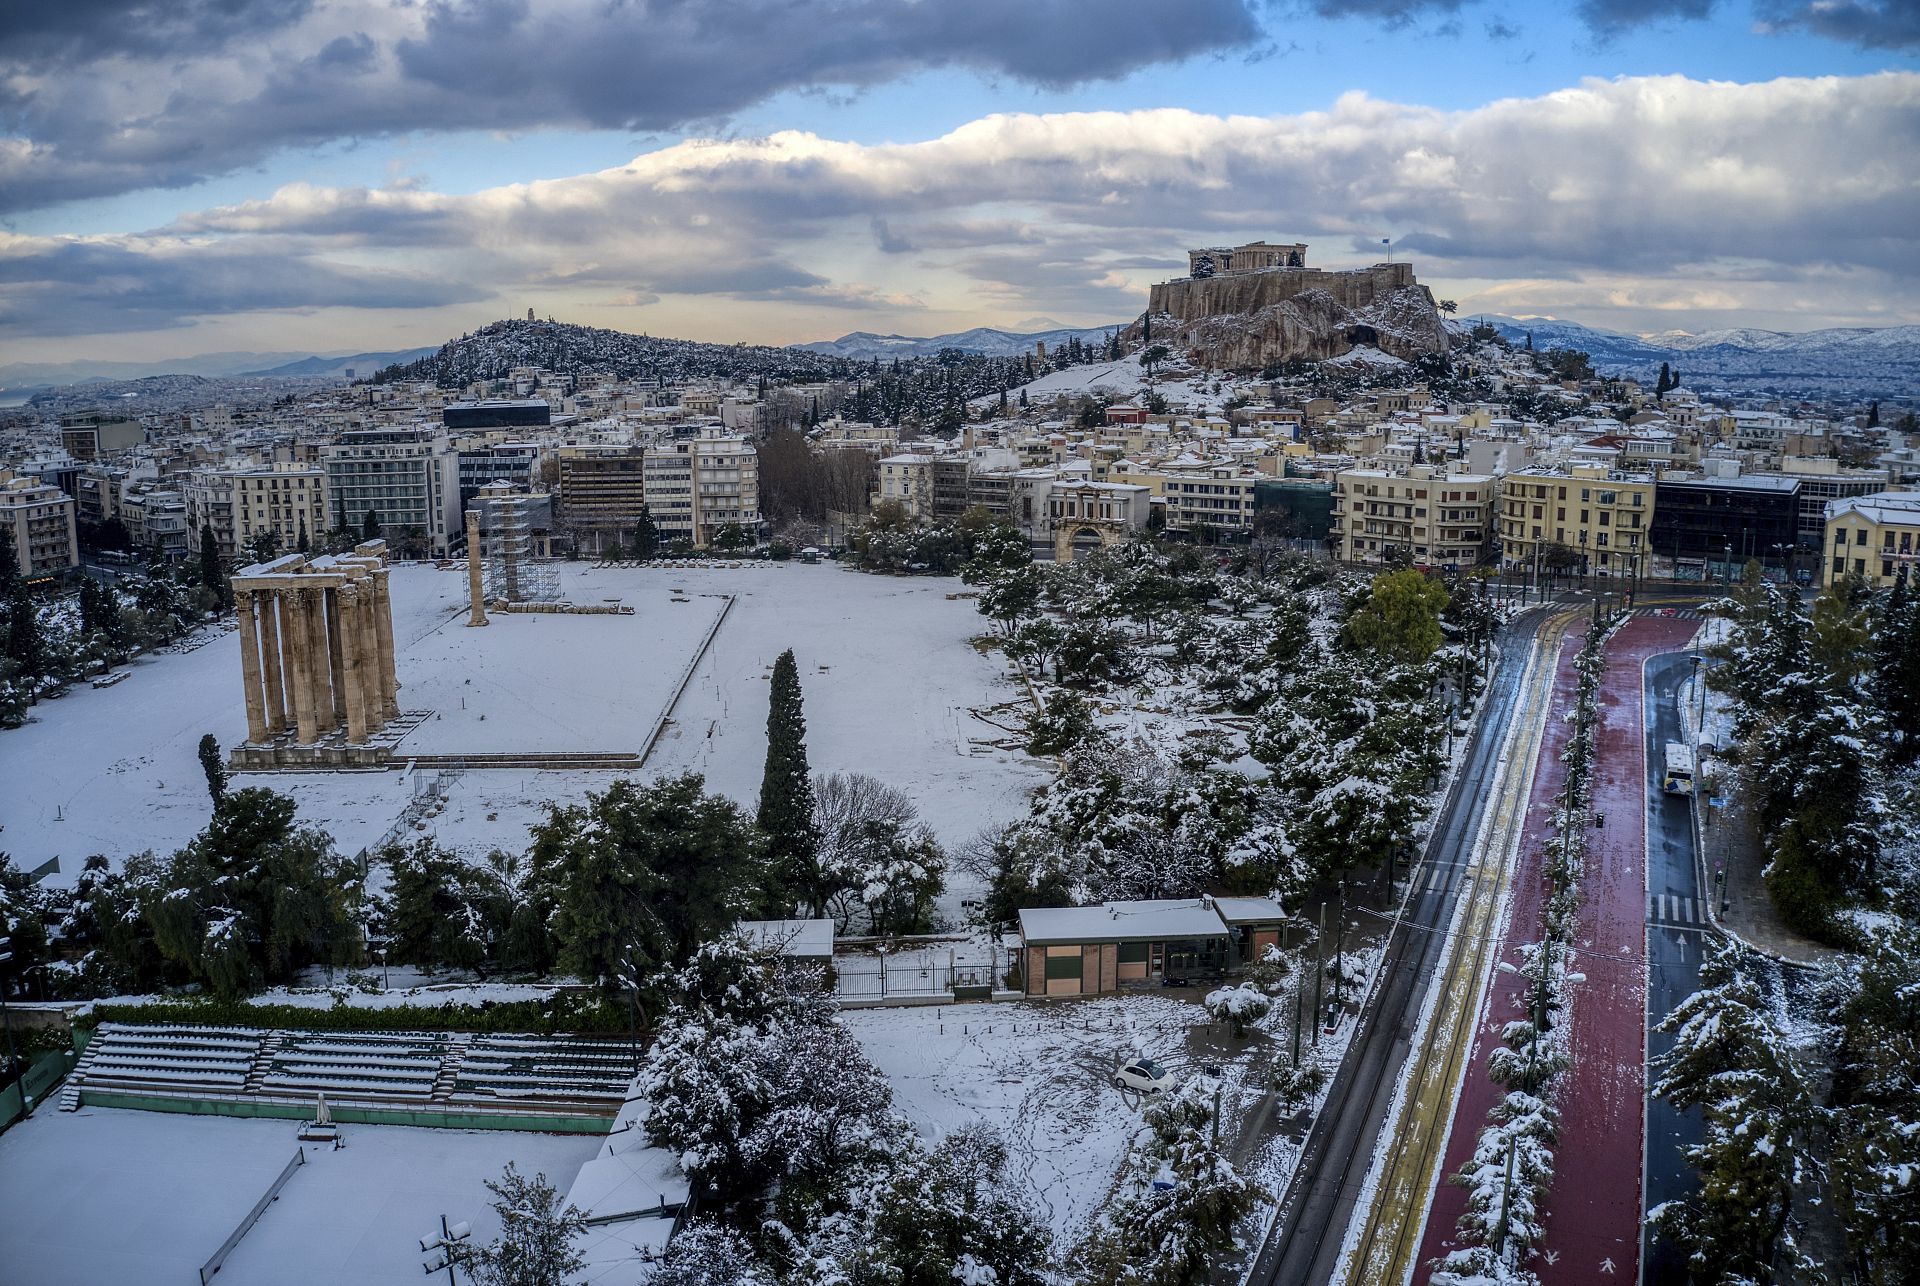 The iconic Acropolis in Athens is covered in snow for the first time in